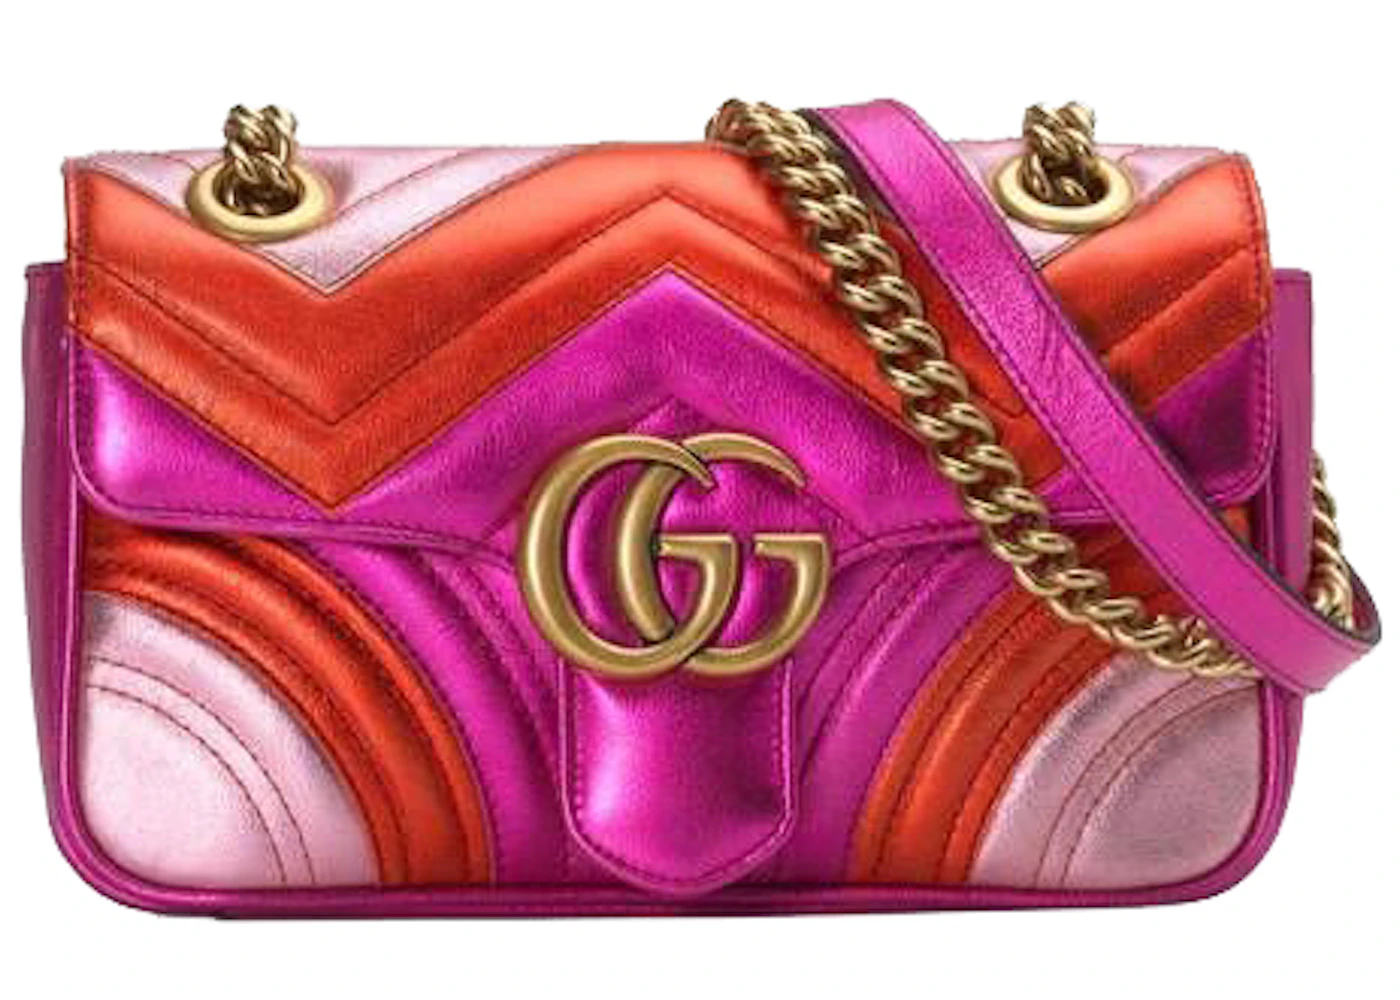 Gucci Marmont Matelasse Shoulder Bag Mini GG Metallic Red/Pink in Calfskin  Leather with Antique Gold-tone - US